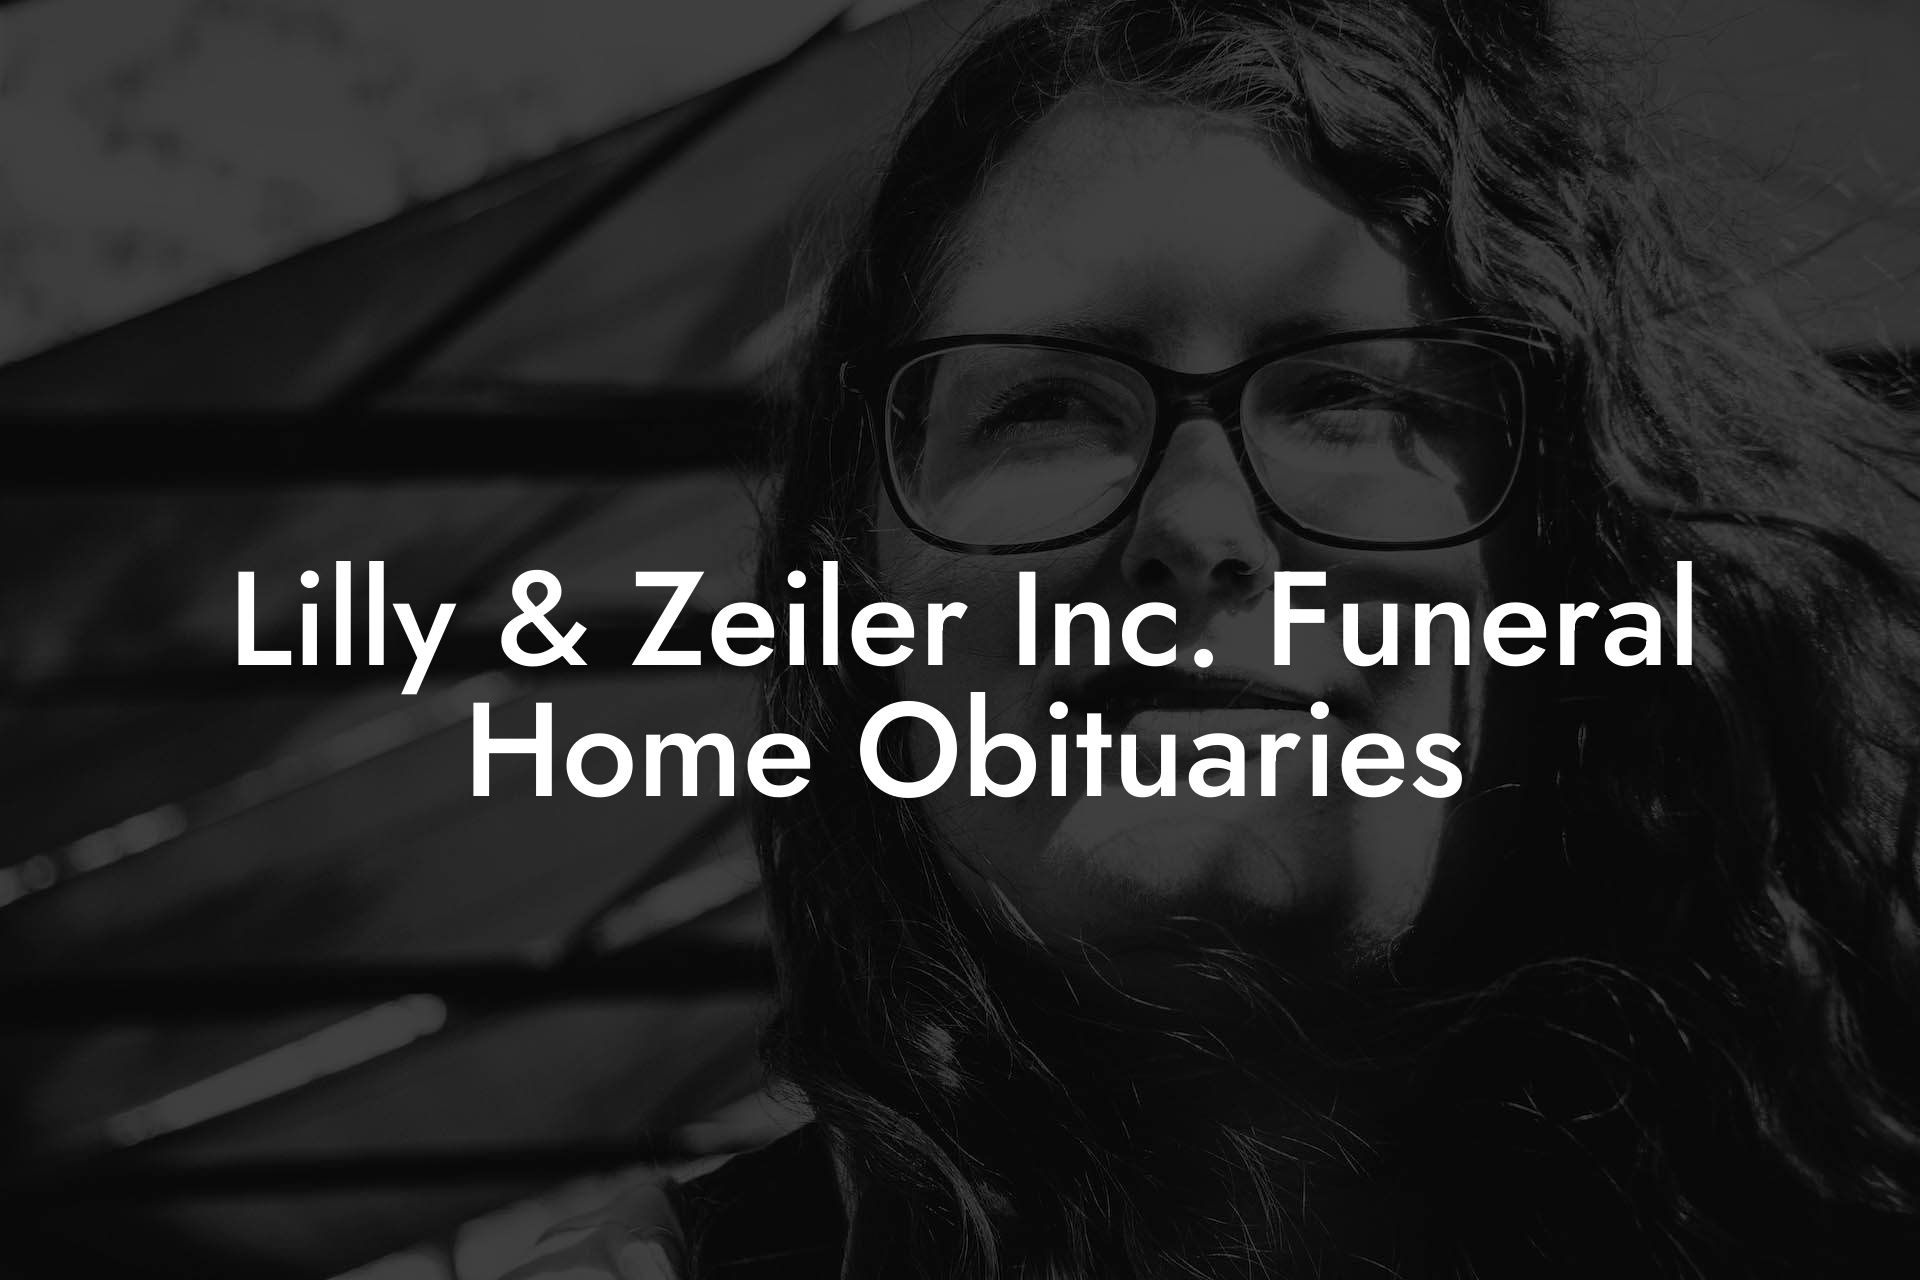 Lilly & Zeiler Inc. Funeral Home Obituaries